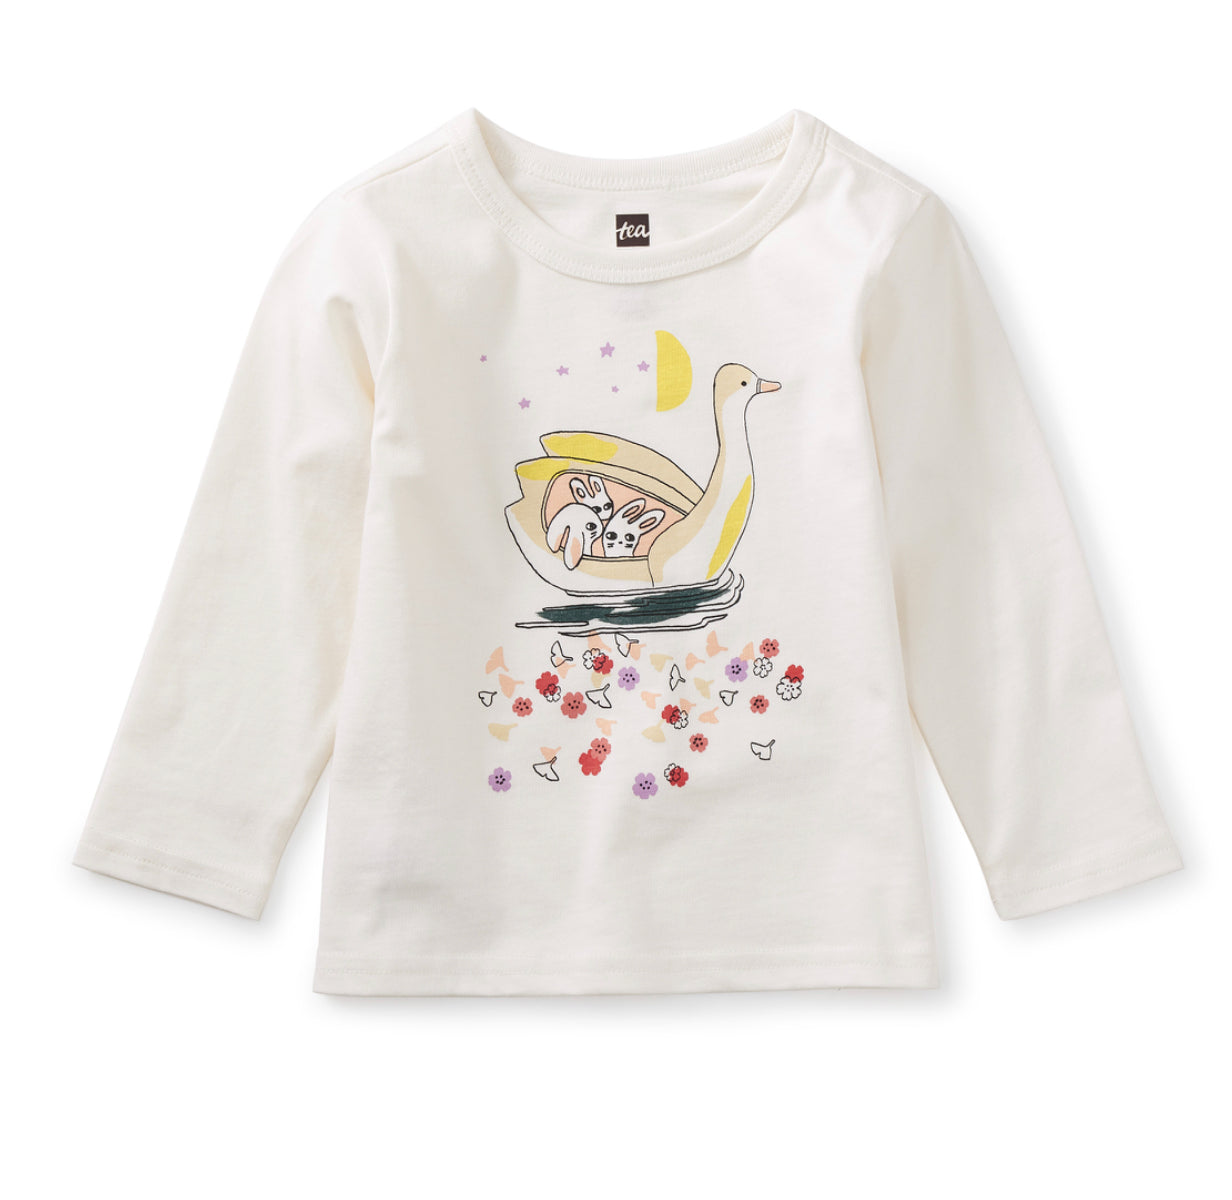 SWAN BOAT BABY GRAPHIC TEE